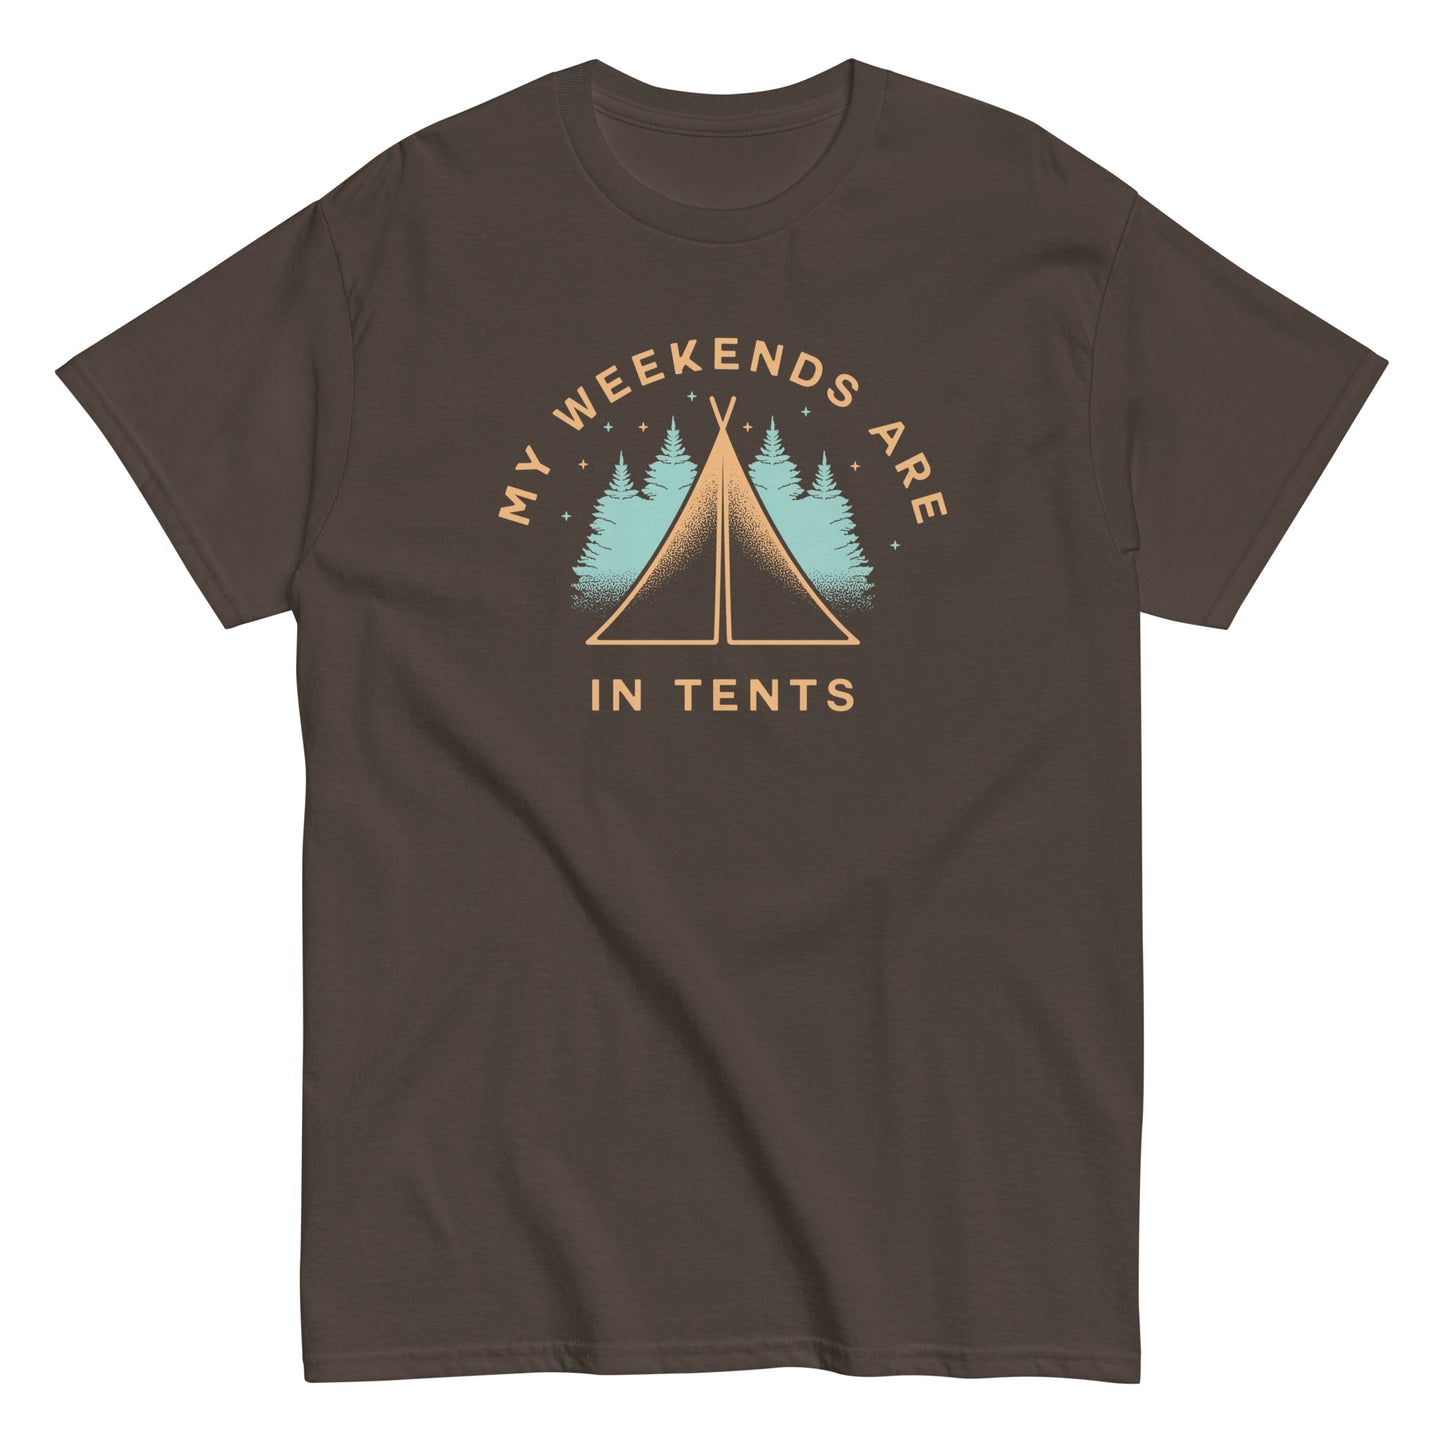 My Weekends Are In Tents Men's Classic Tee